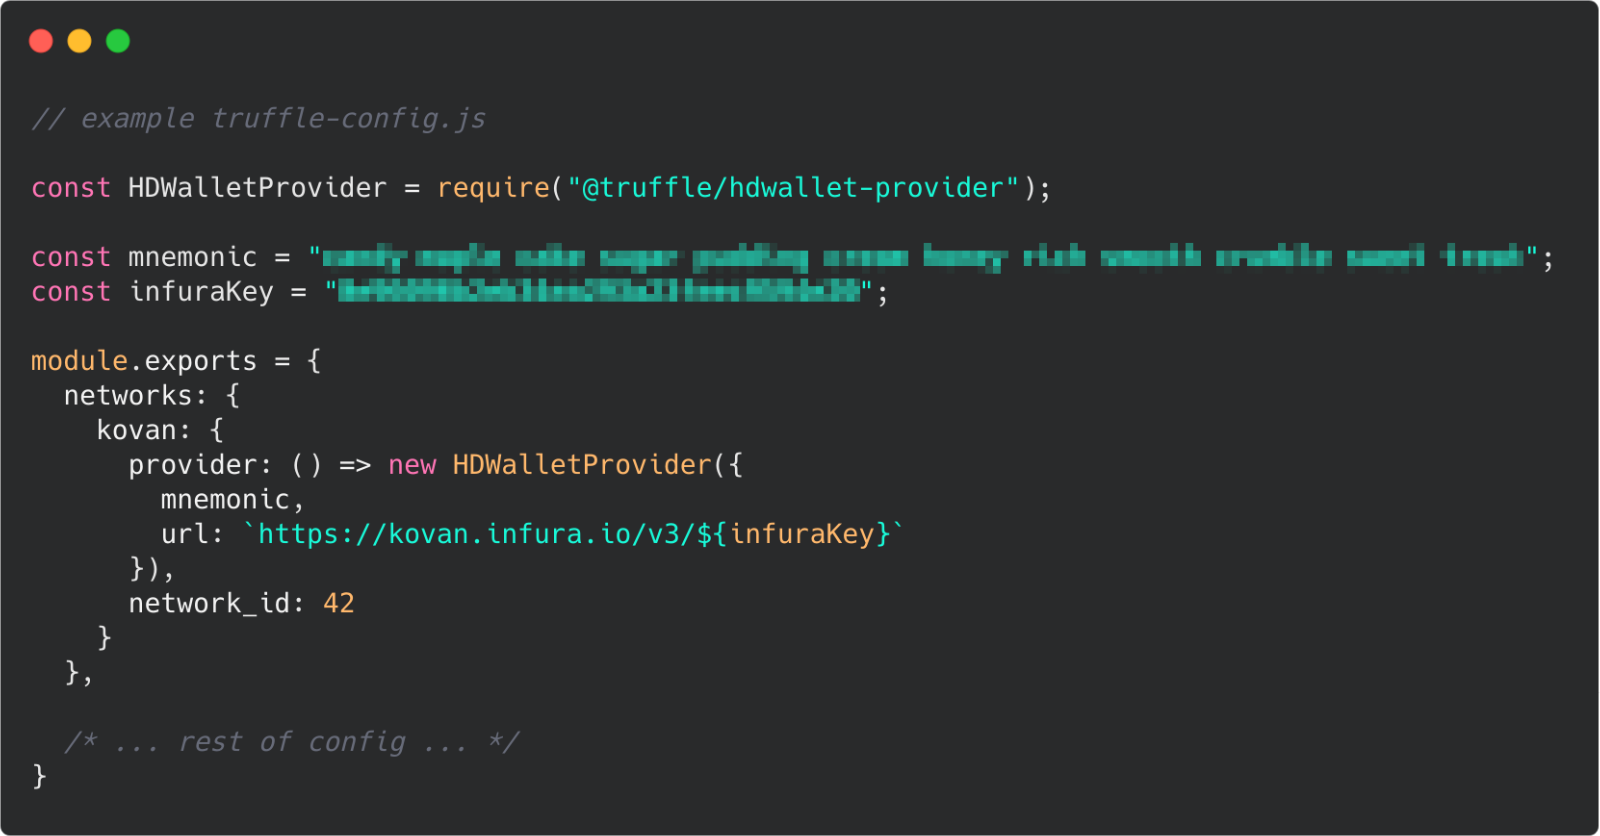 Screenshot of an example truffle-config.js using HDWalletProvider with hardcoded mnemonic and Infura key.